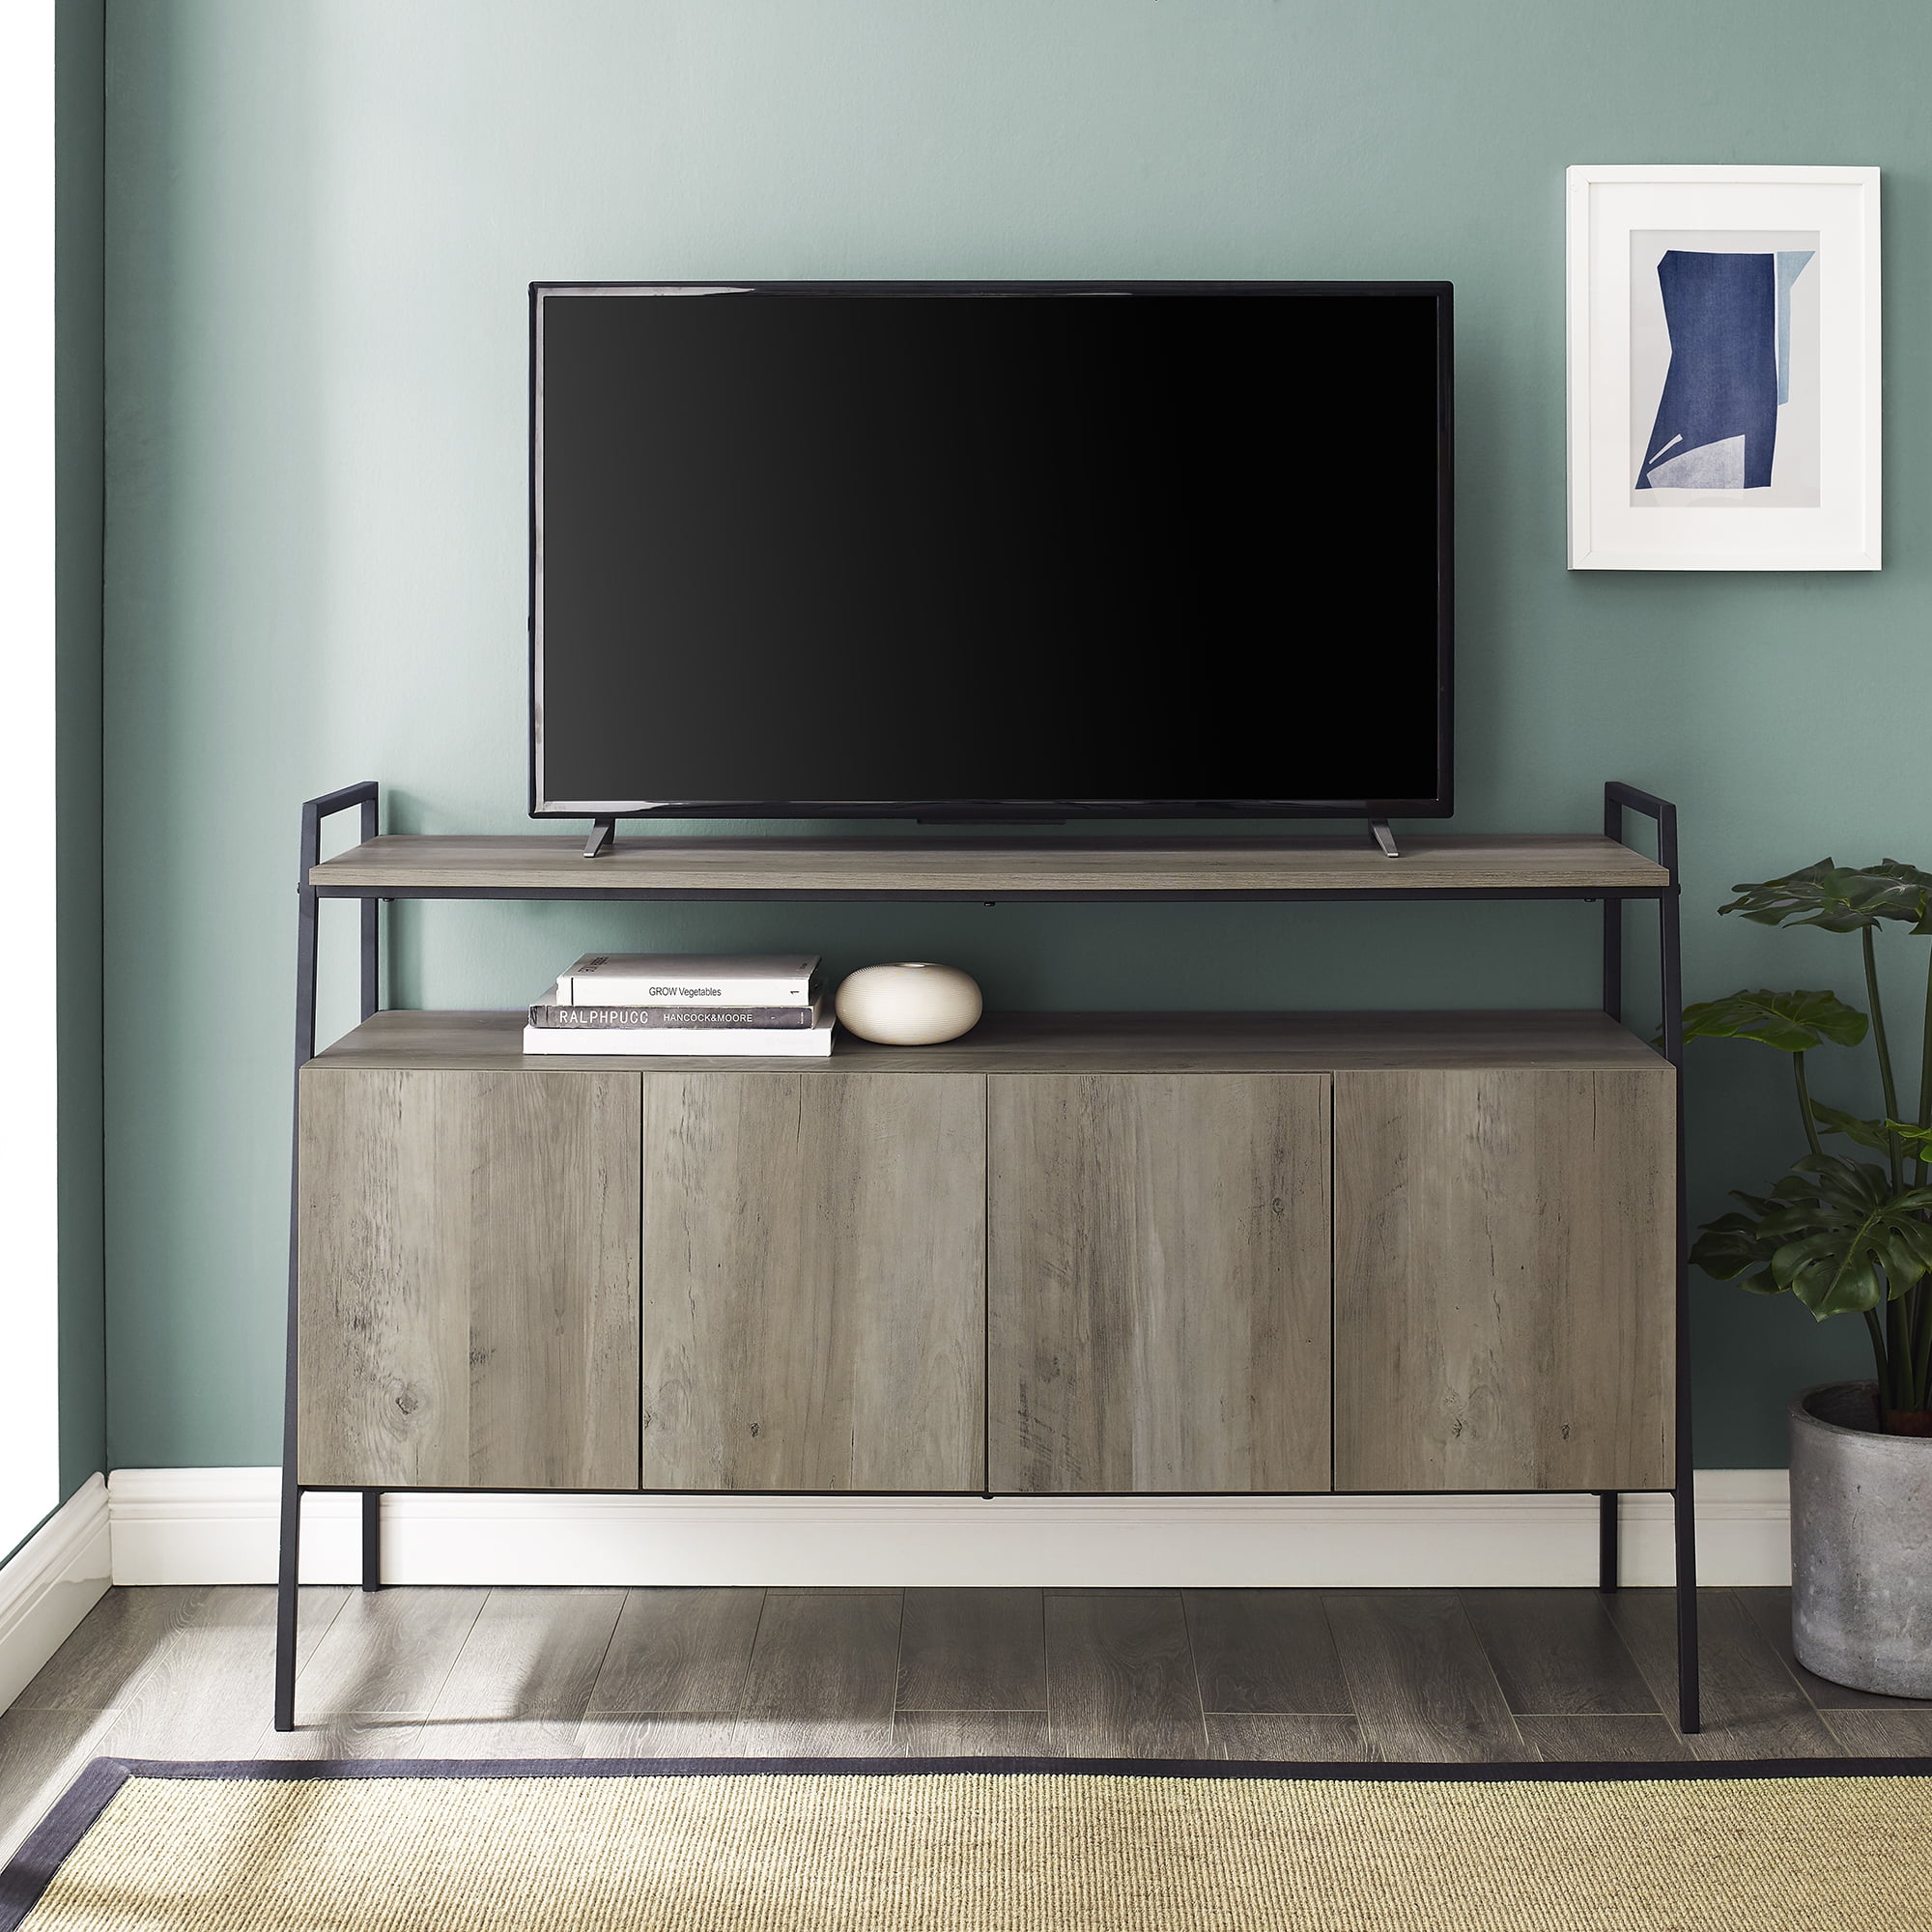 Manor Park Urban Industrial TV Stand for TV s up to 56 